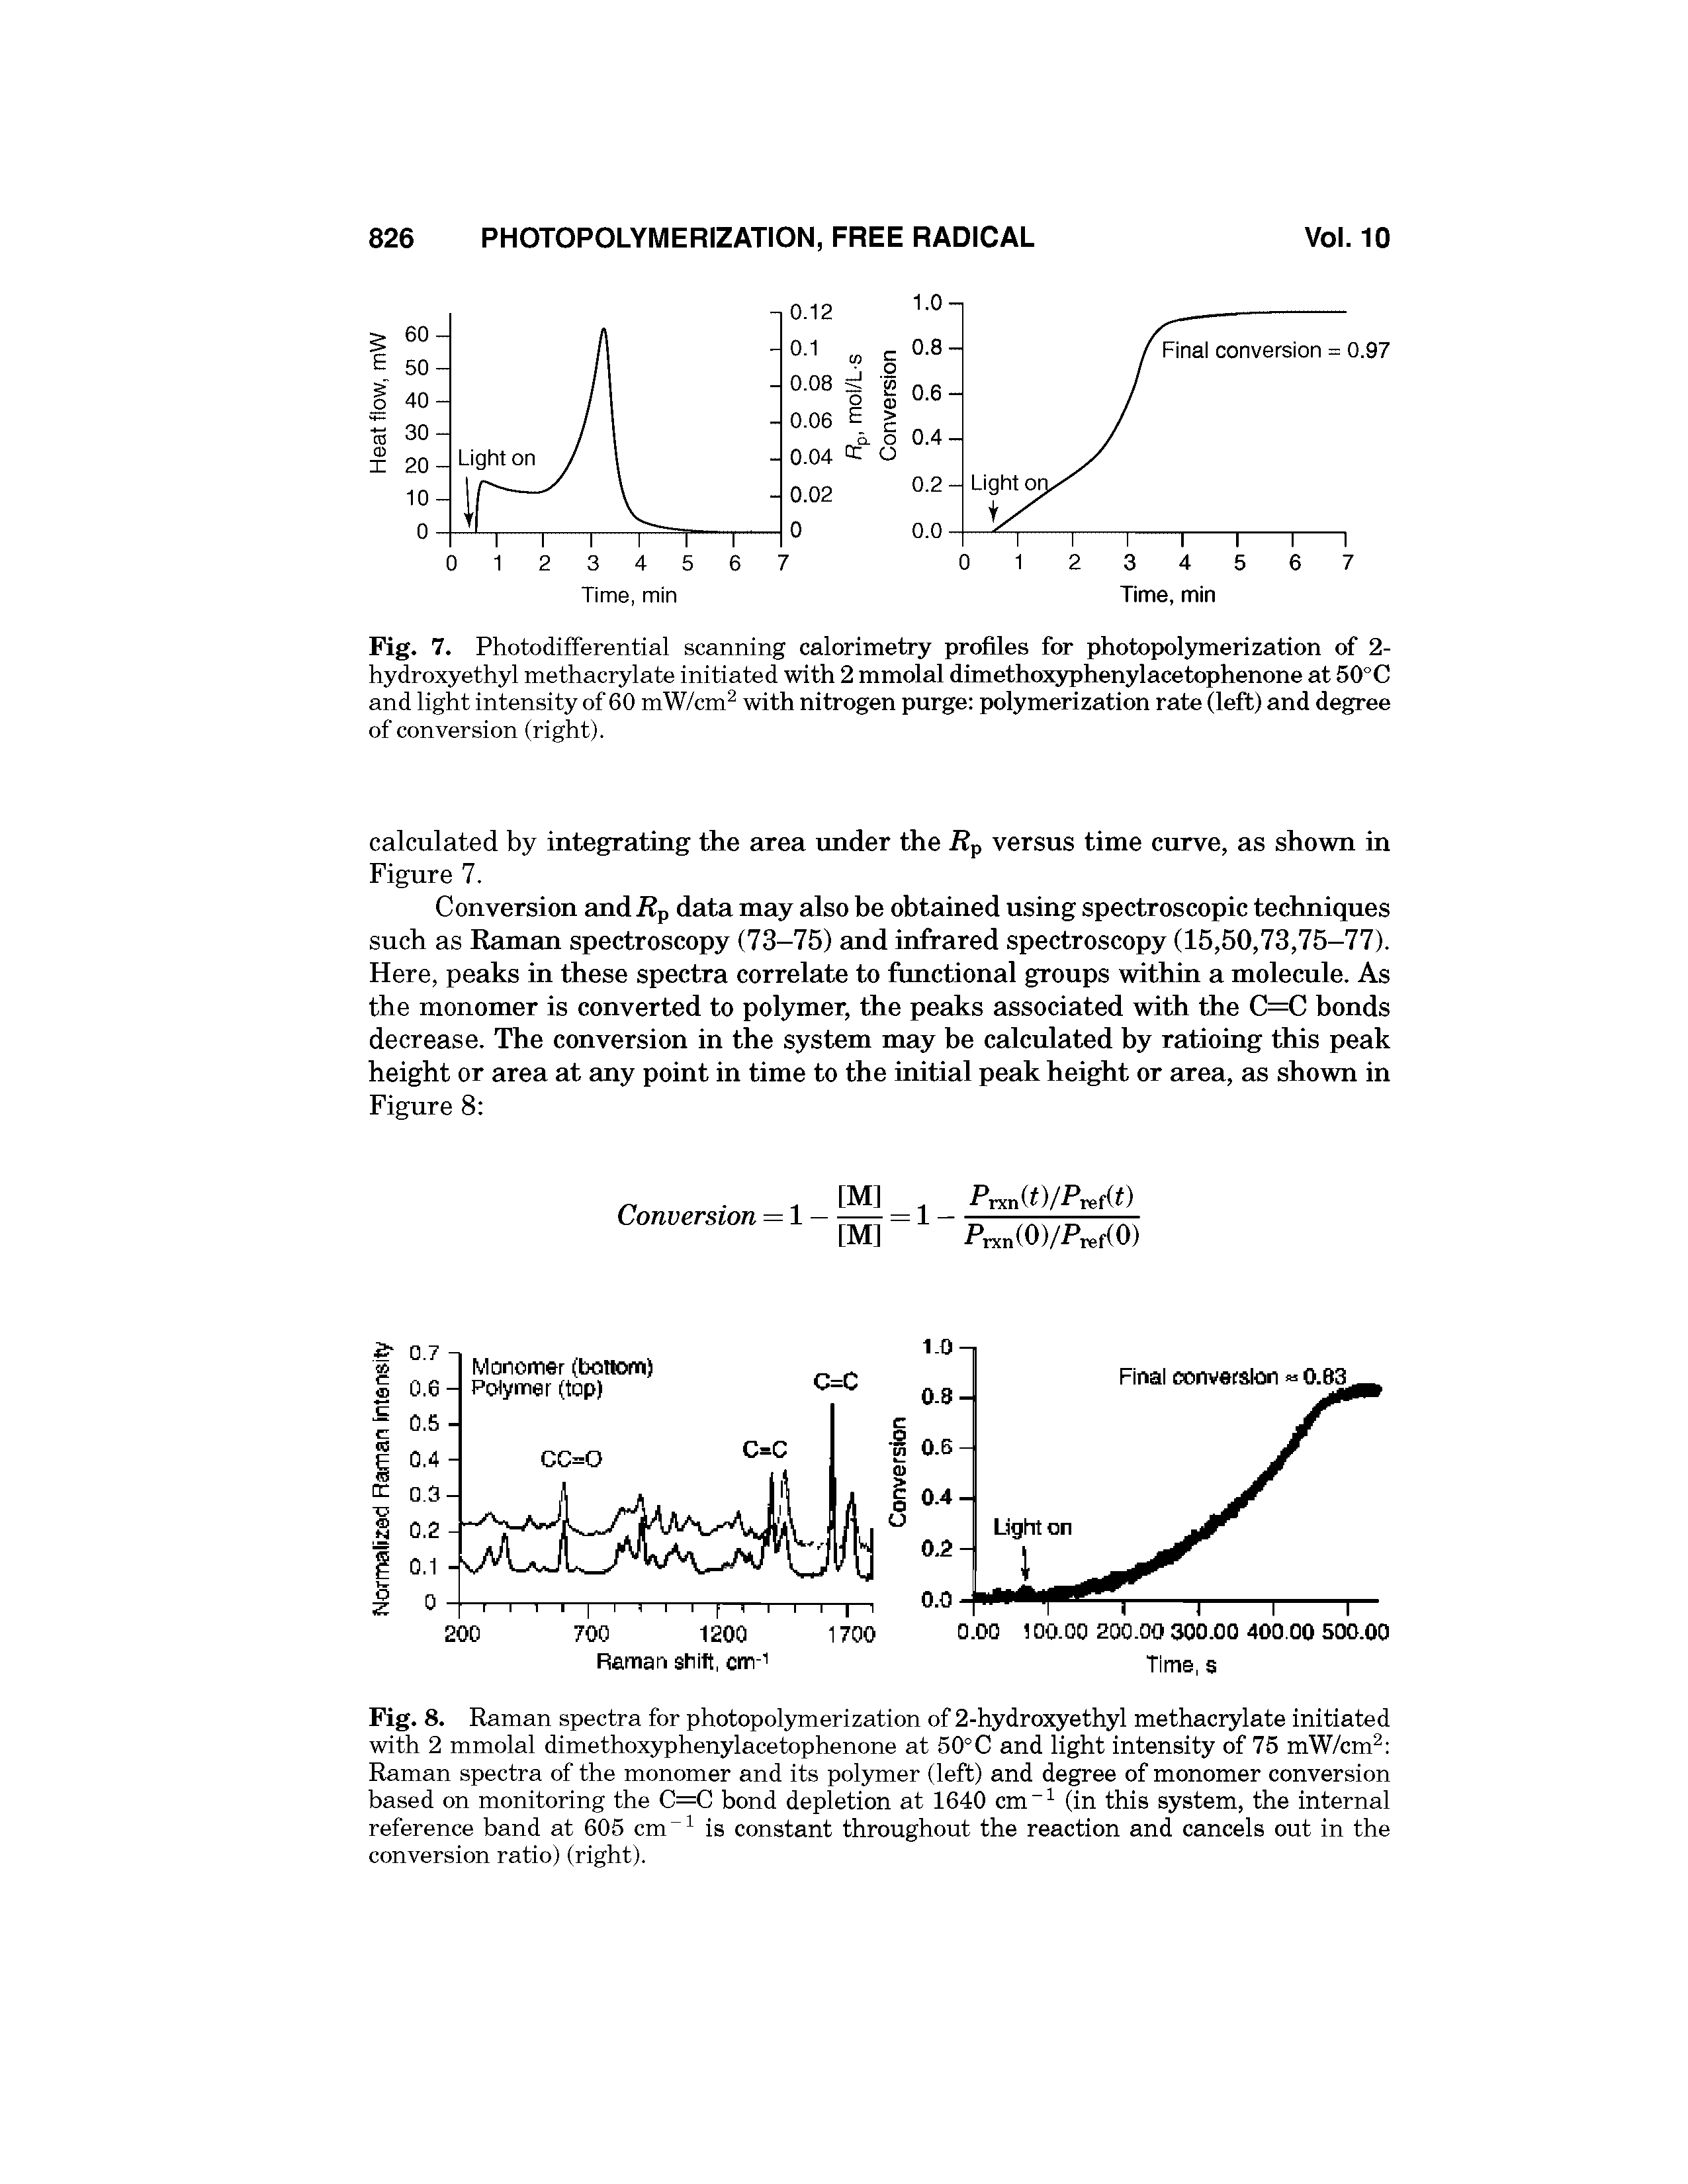 Fig. 8. Raman spectra for photopolymerization of 2-hydroxyethyl methacrylate initiated with 2 mmolal dimethoxyphenylacetophenone at 50°C and light intensity of 75 mW/cm Raman spectra of the monomer and its polymer (left) and degree of monomer conversion based on monitoring the C=C bond depletion at 1640 cm (in this system, the internal reference band at 605 cm is constant throughout the reaction and cancels out in the conversion ratio) (right).